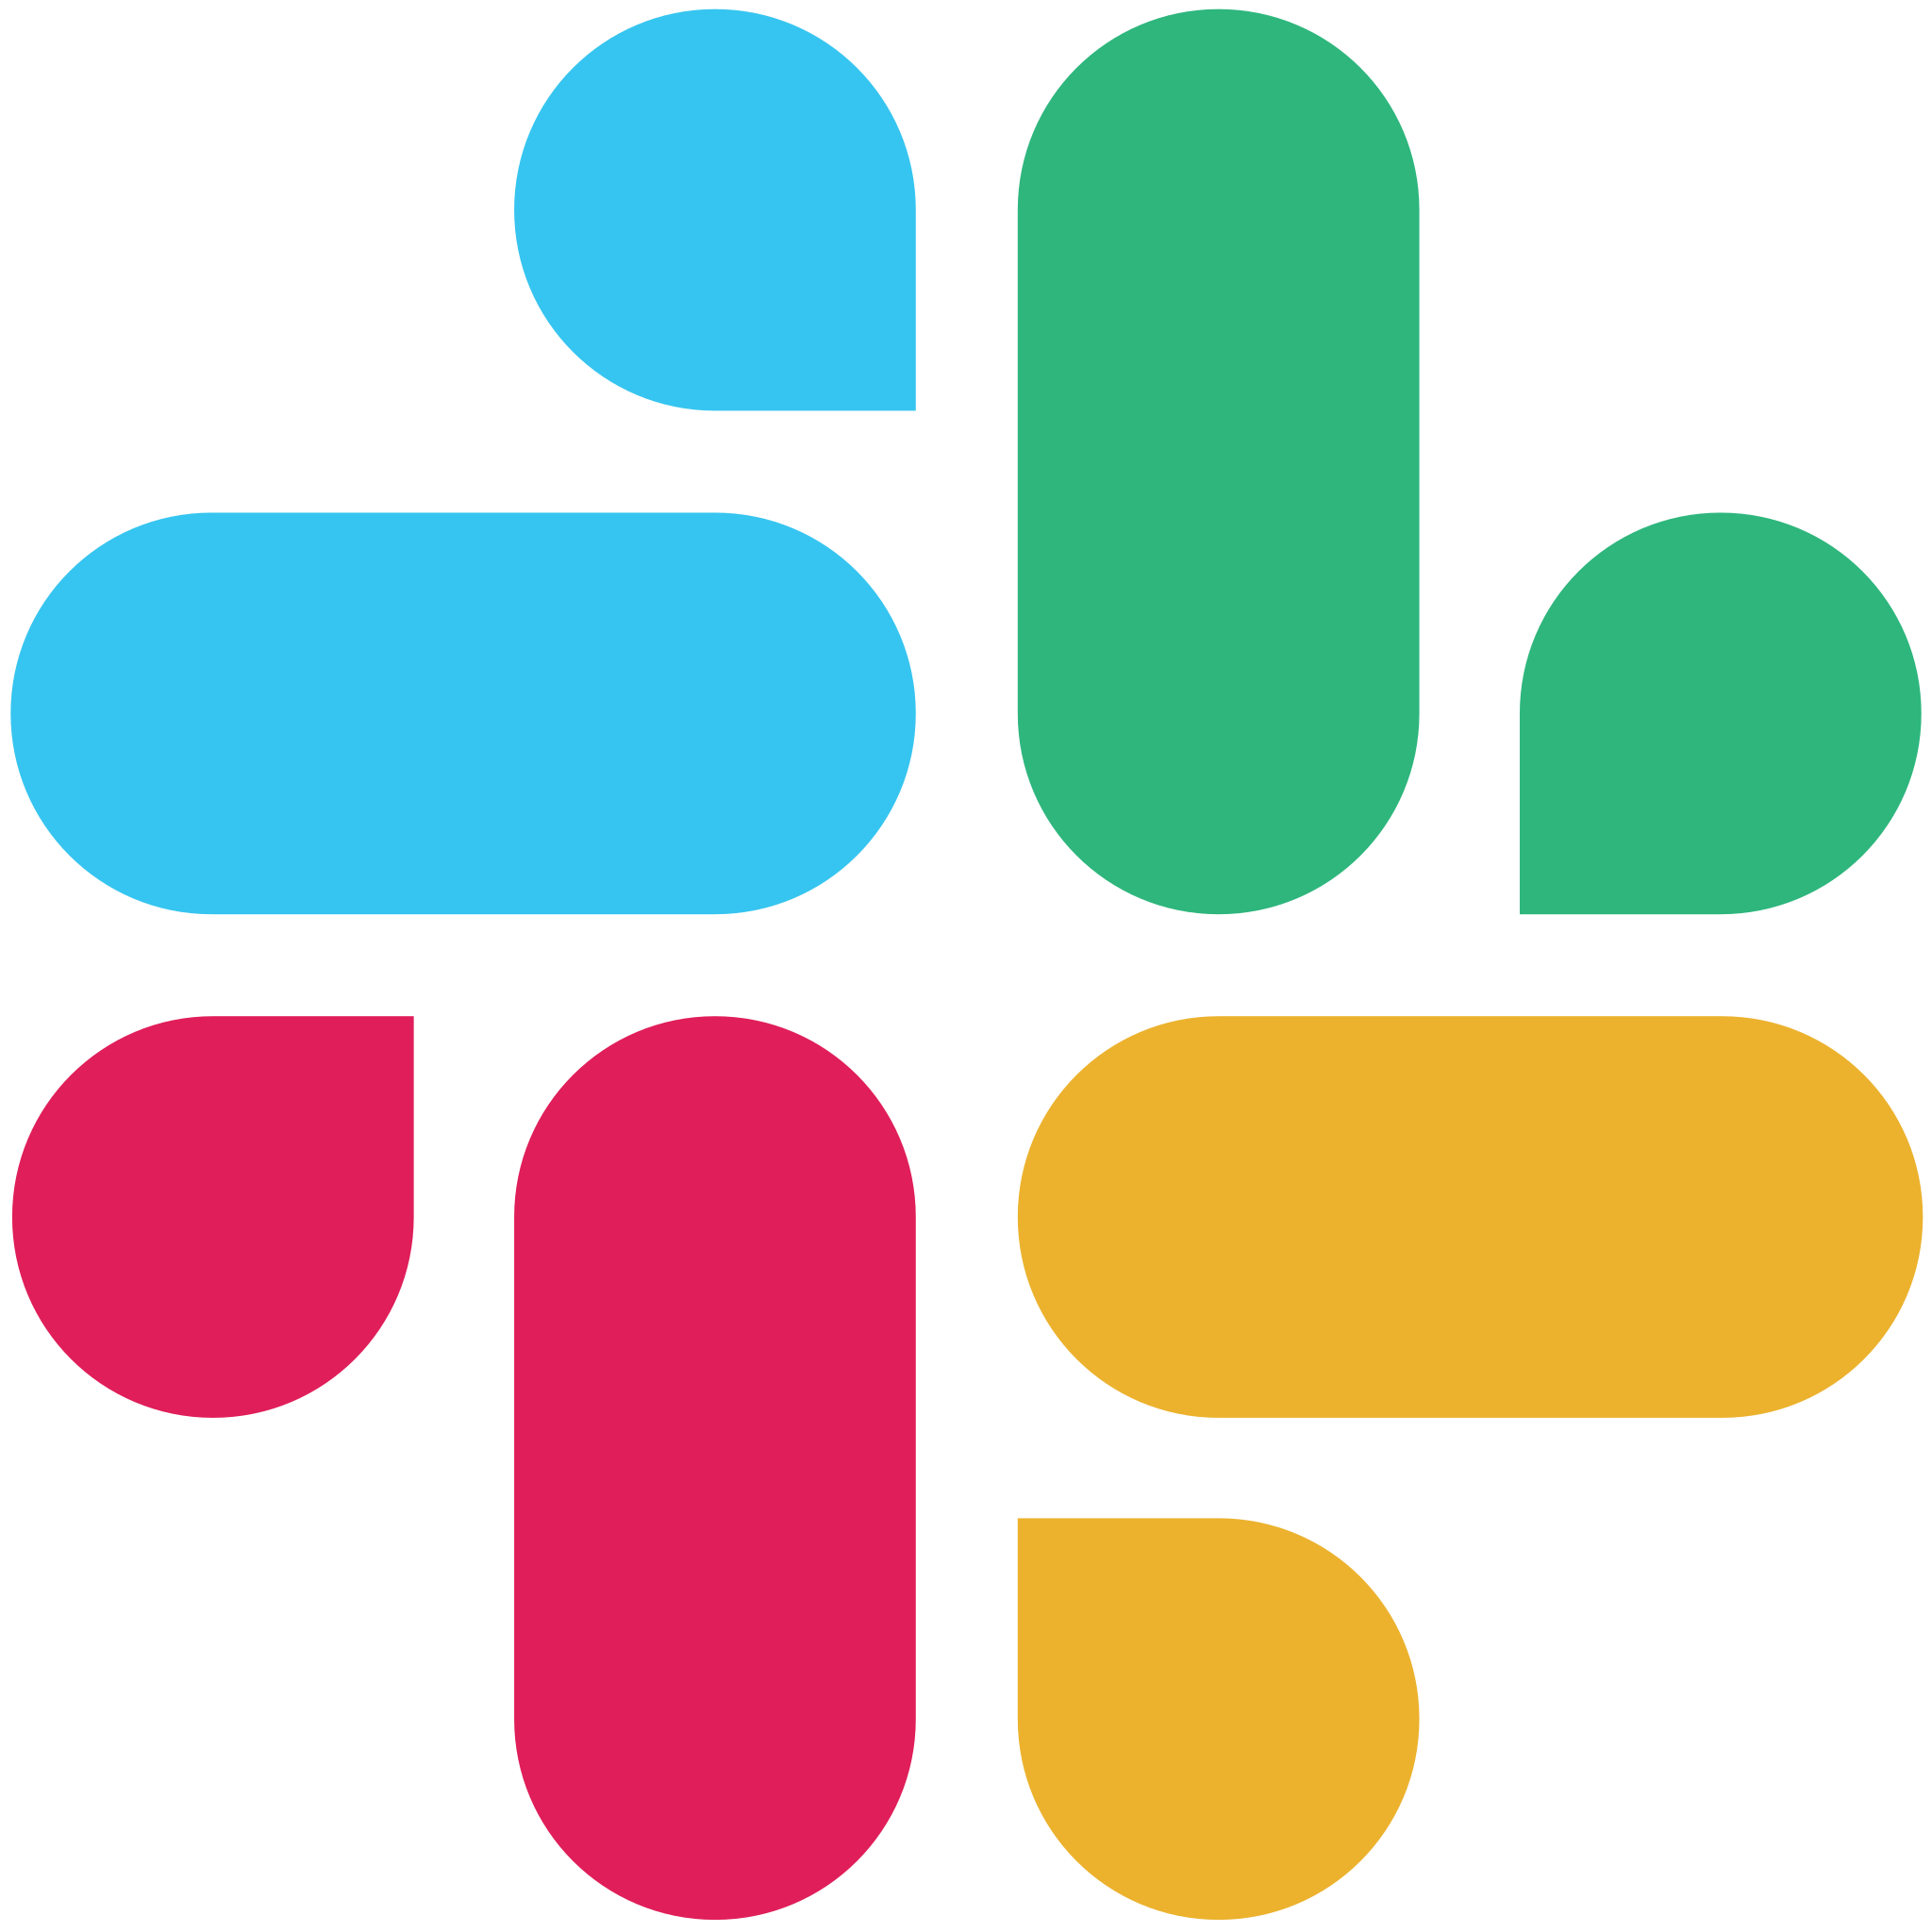 Slack (more than 3 years experience)